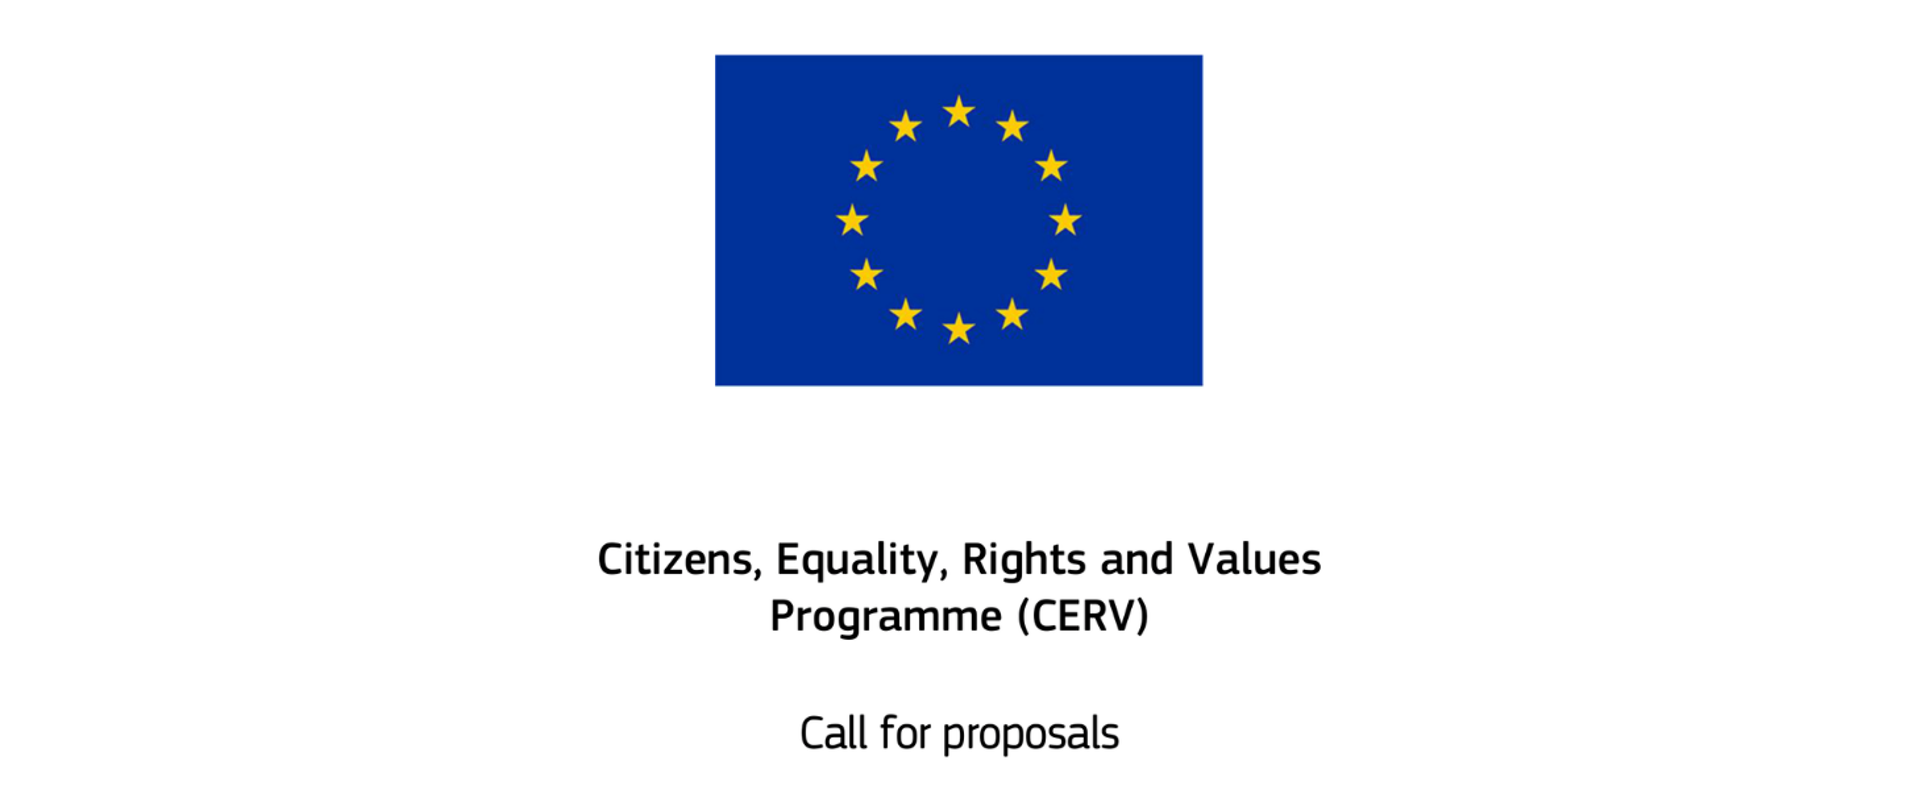 Citizens, Equality, Rights and Values Programme (CERV)